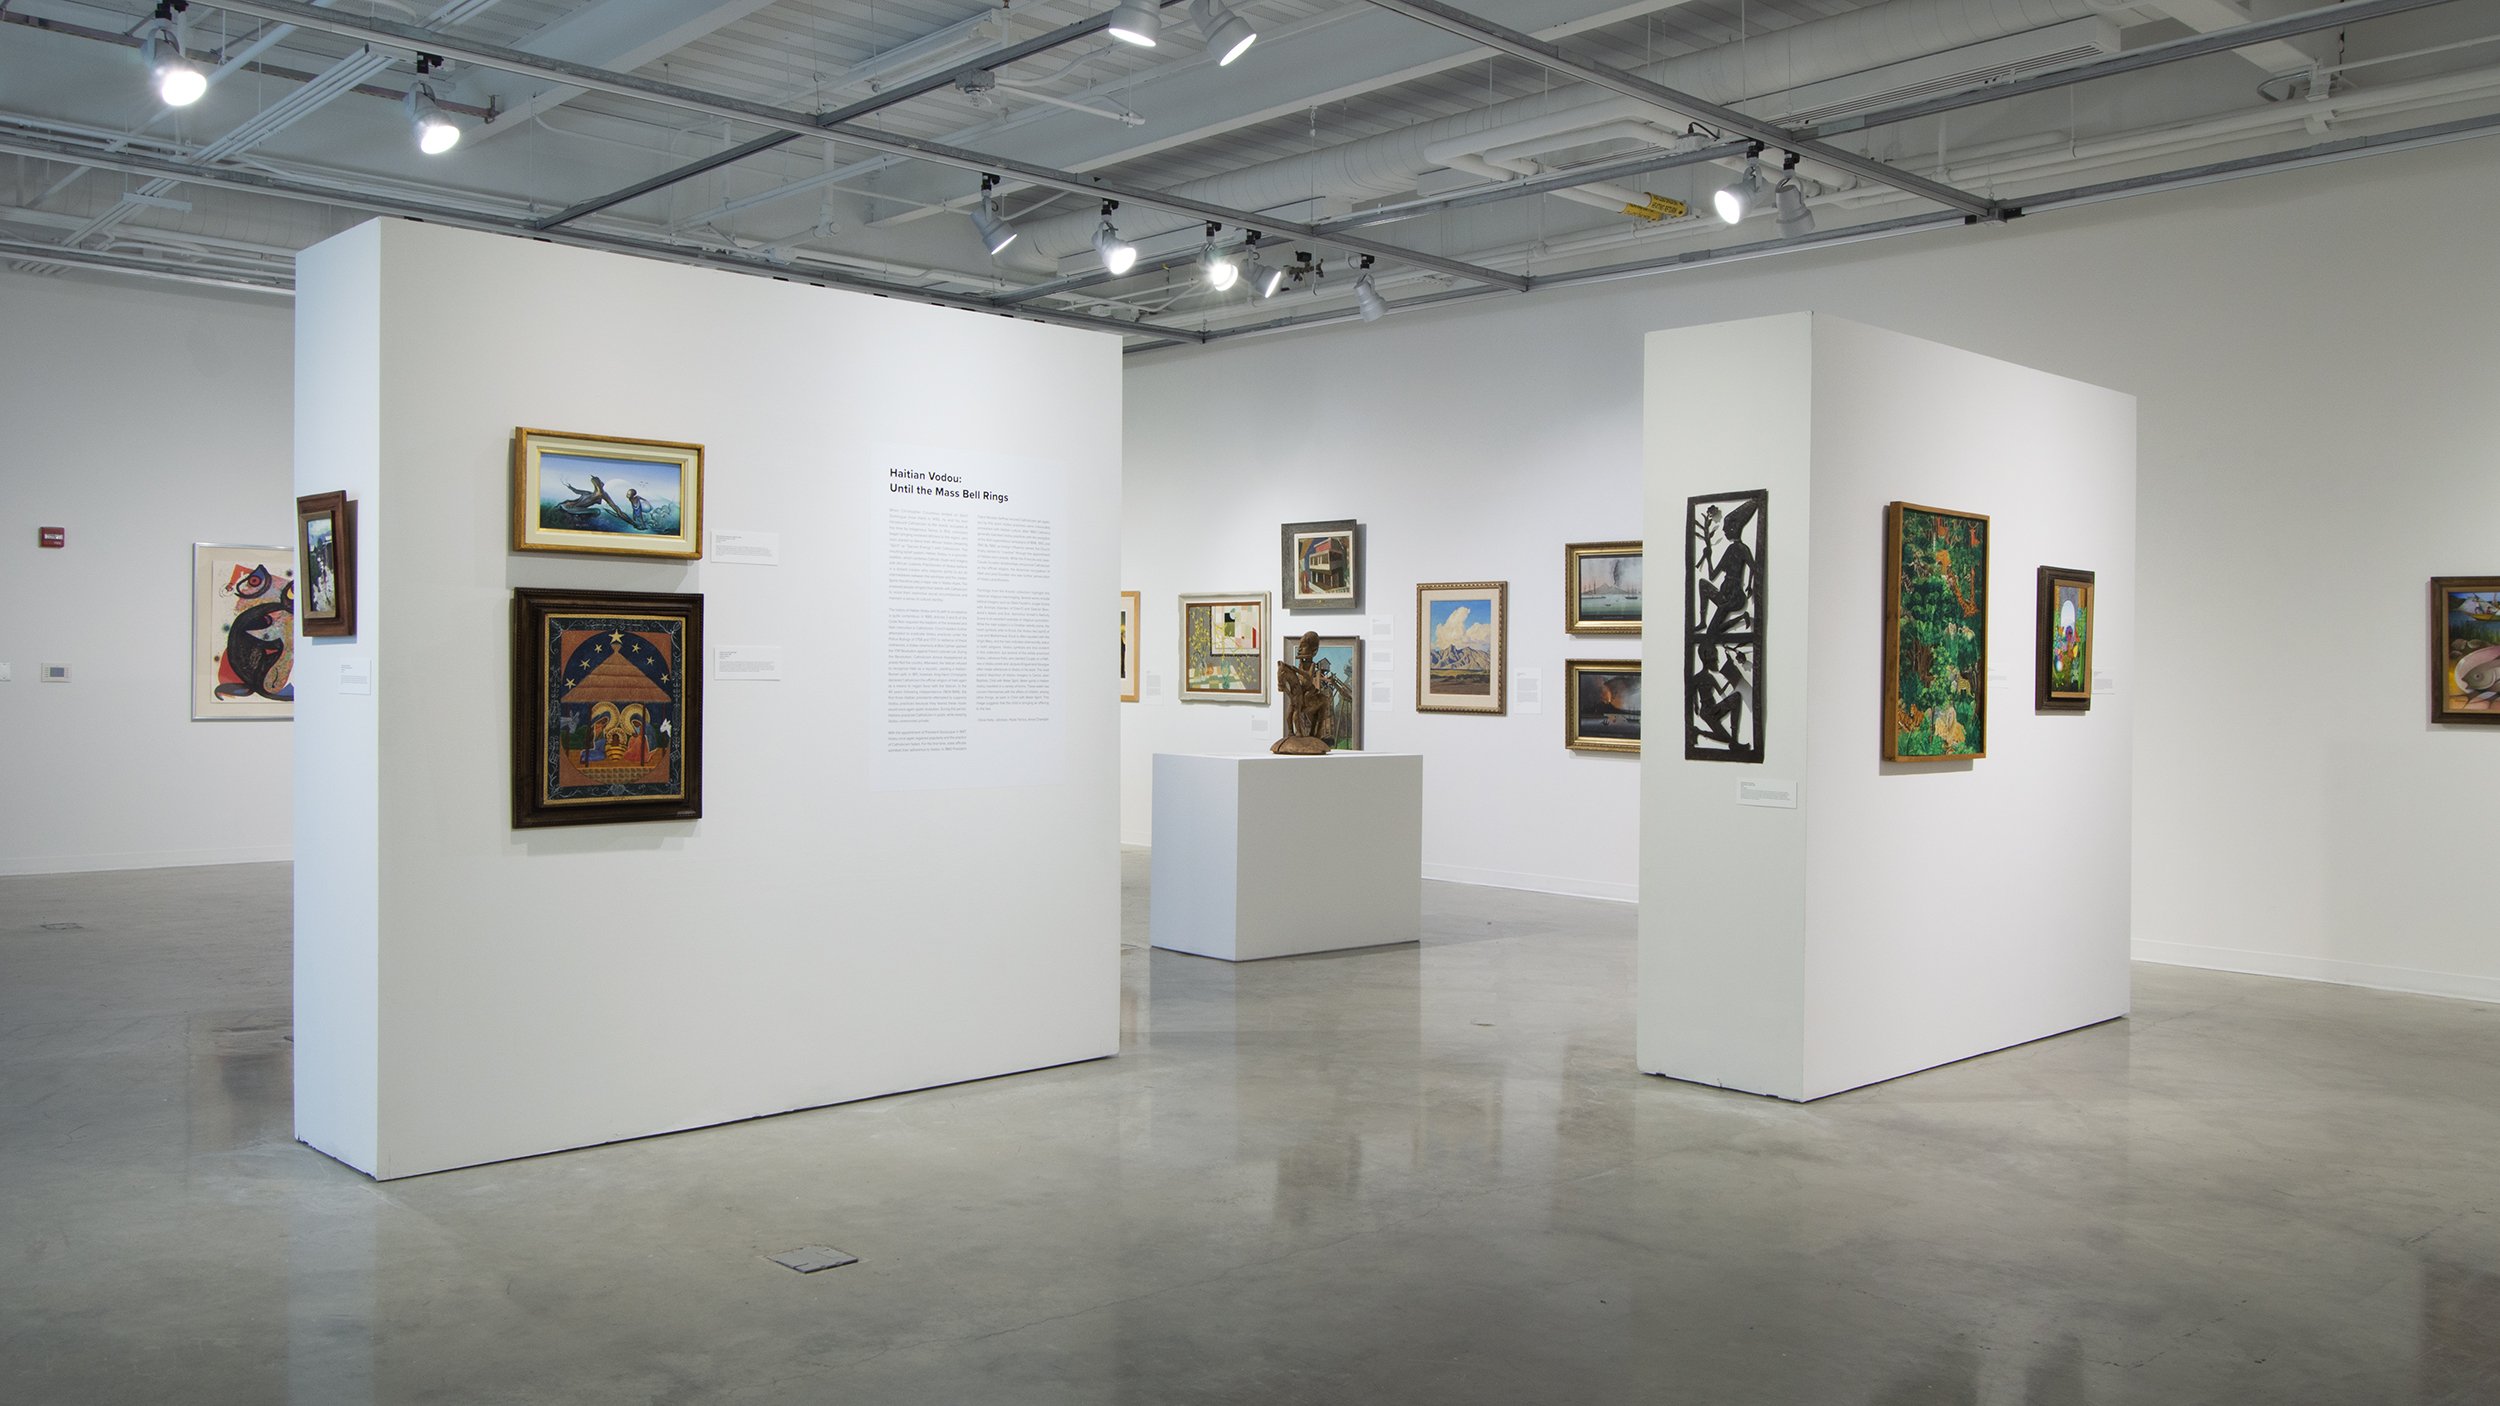 A view of an exhibition of Haitian art. Two floating walls stand adjacent, each displaying paintings of Haitian subjects and scenes. The far walls display additional paintings of American landscapes and post-War modernist prints.